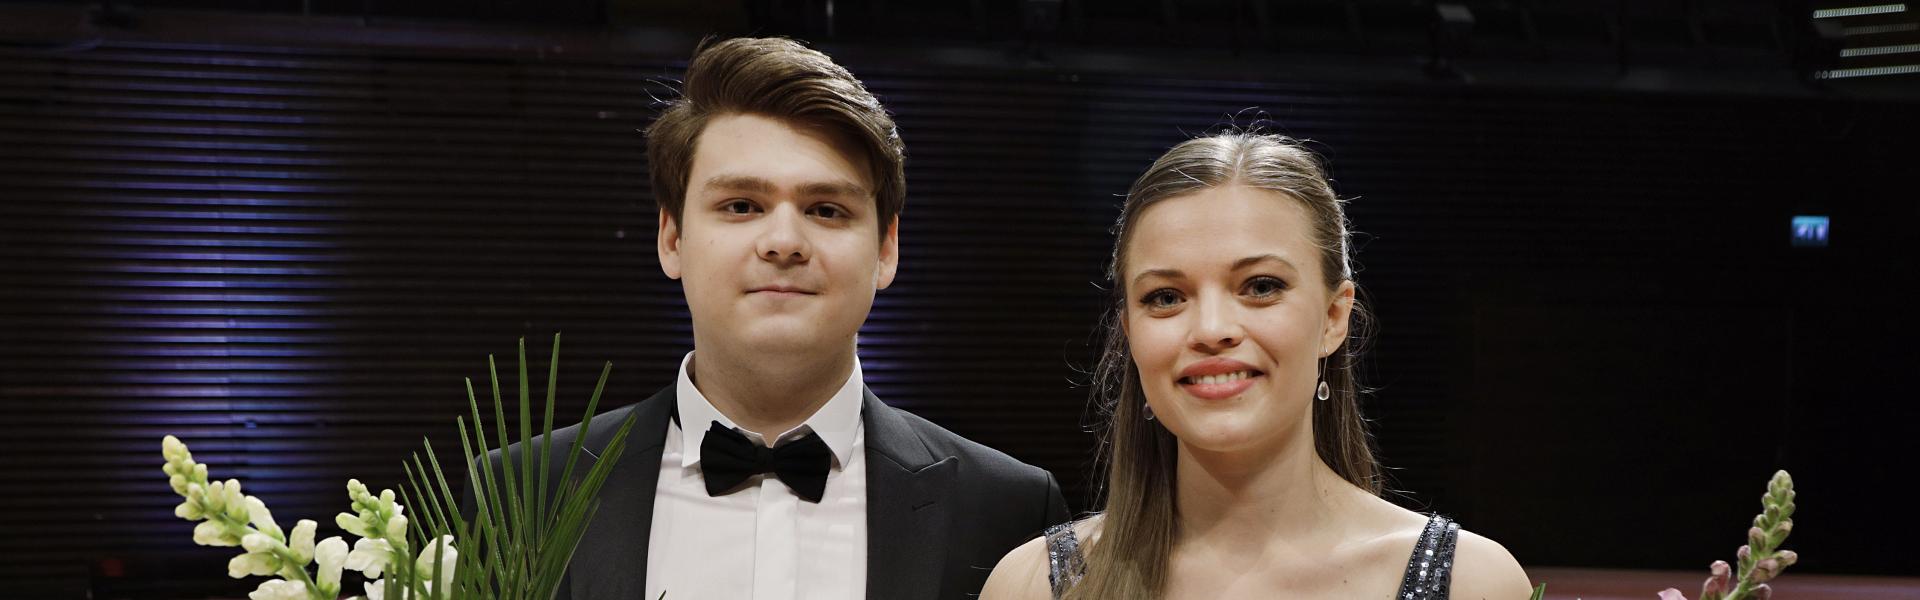 The Winners of the Mirjam Helin International Singing Competition 2019